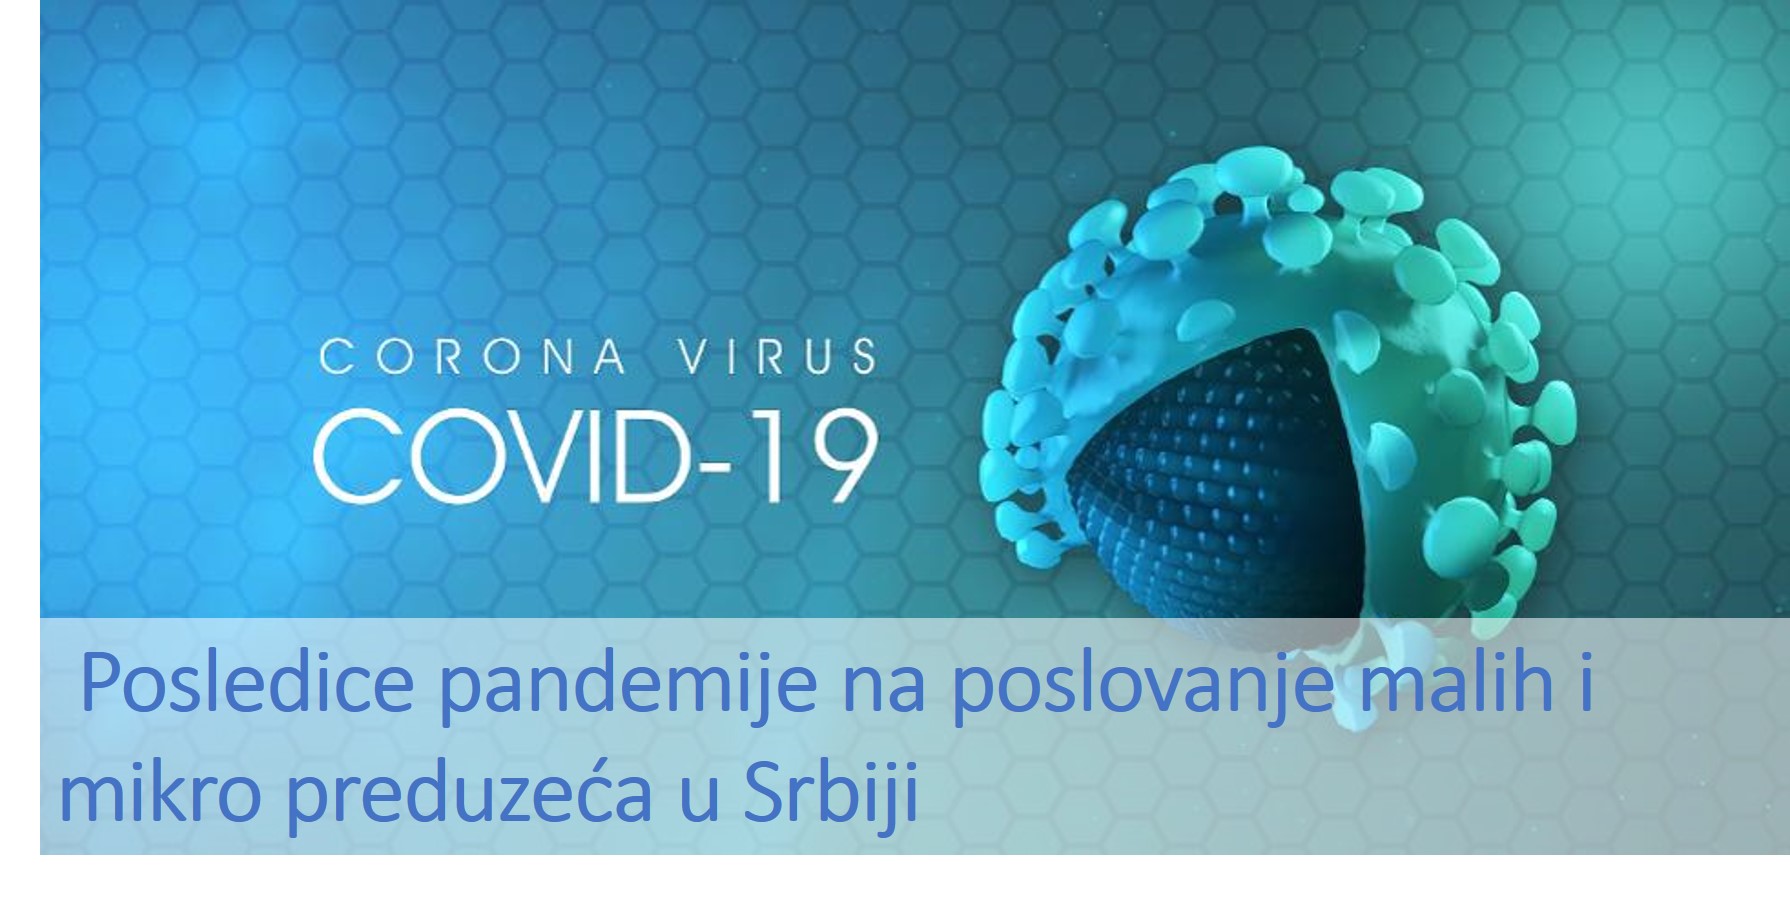 Impact of COVID-19 on Micro and Small Enterprises in Serbia